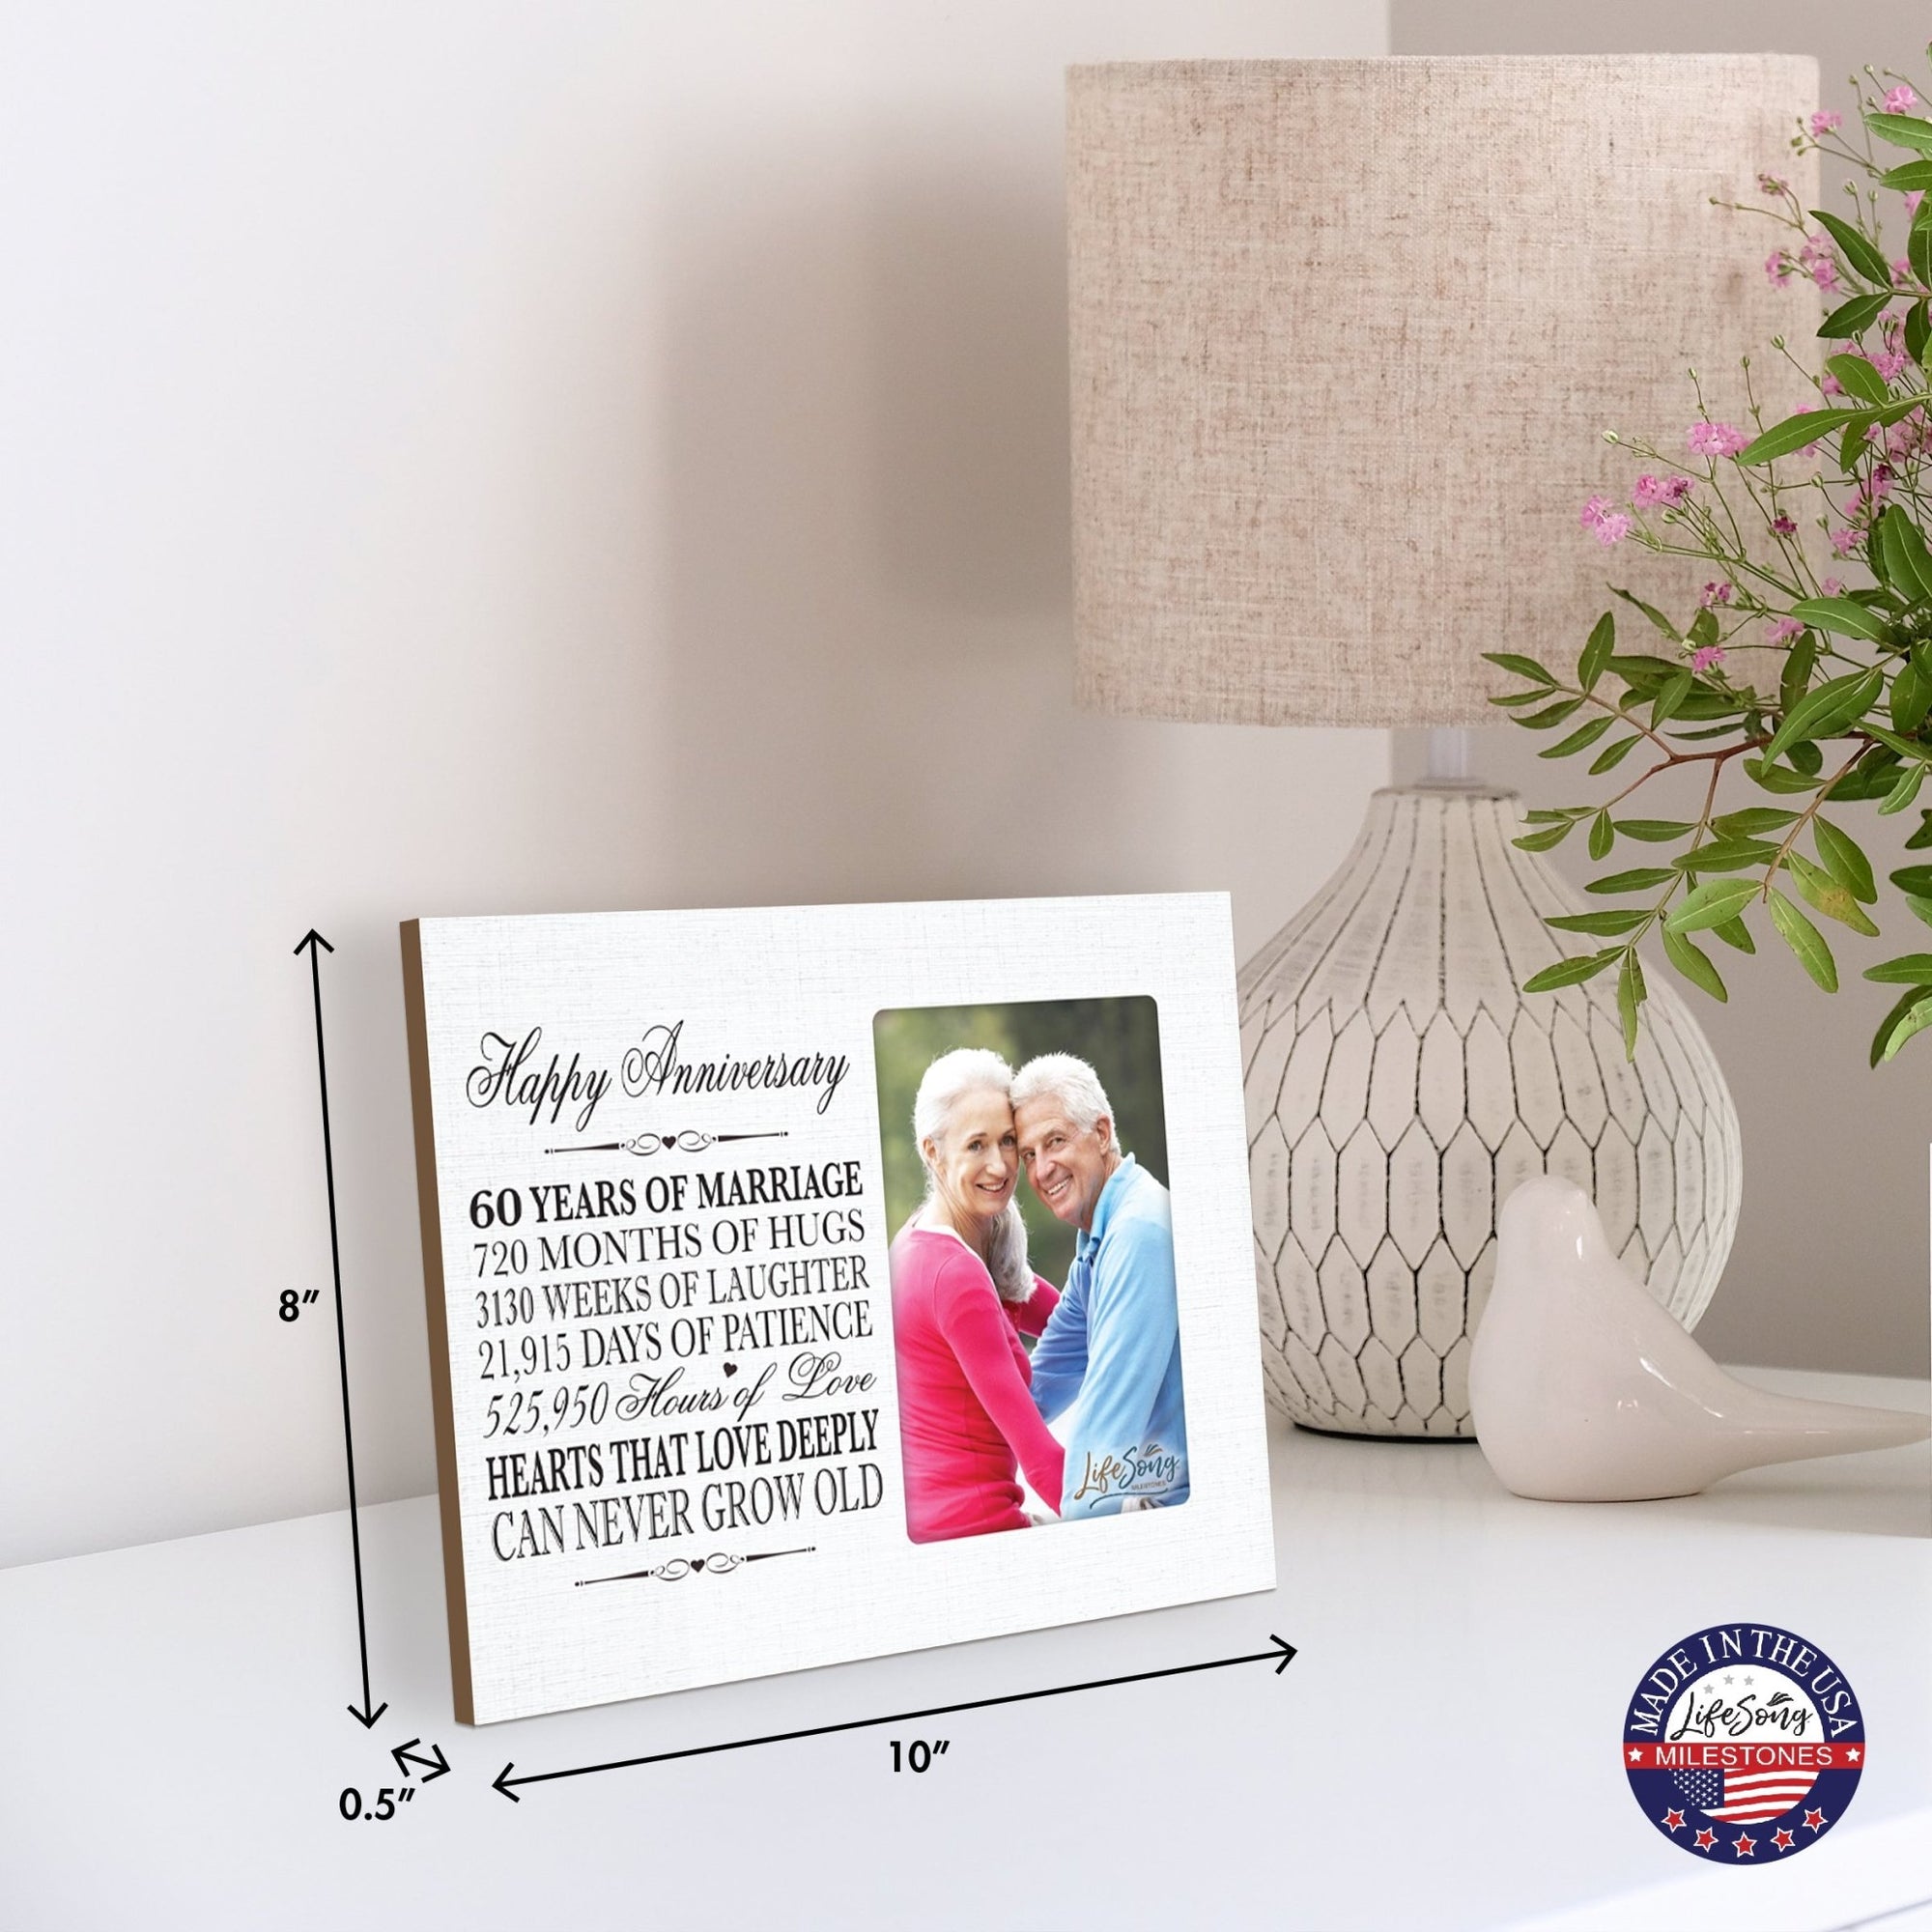 Couples Unique 60th Wedding Anniversary Photo Frame Decorations - Hearts That Love Deeply - LifeSong Milestones